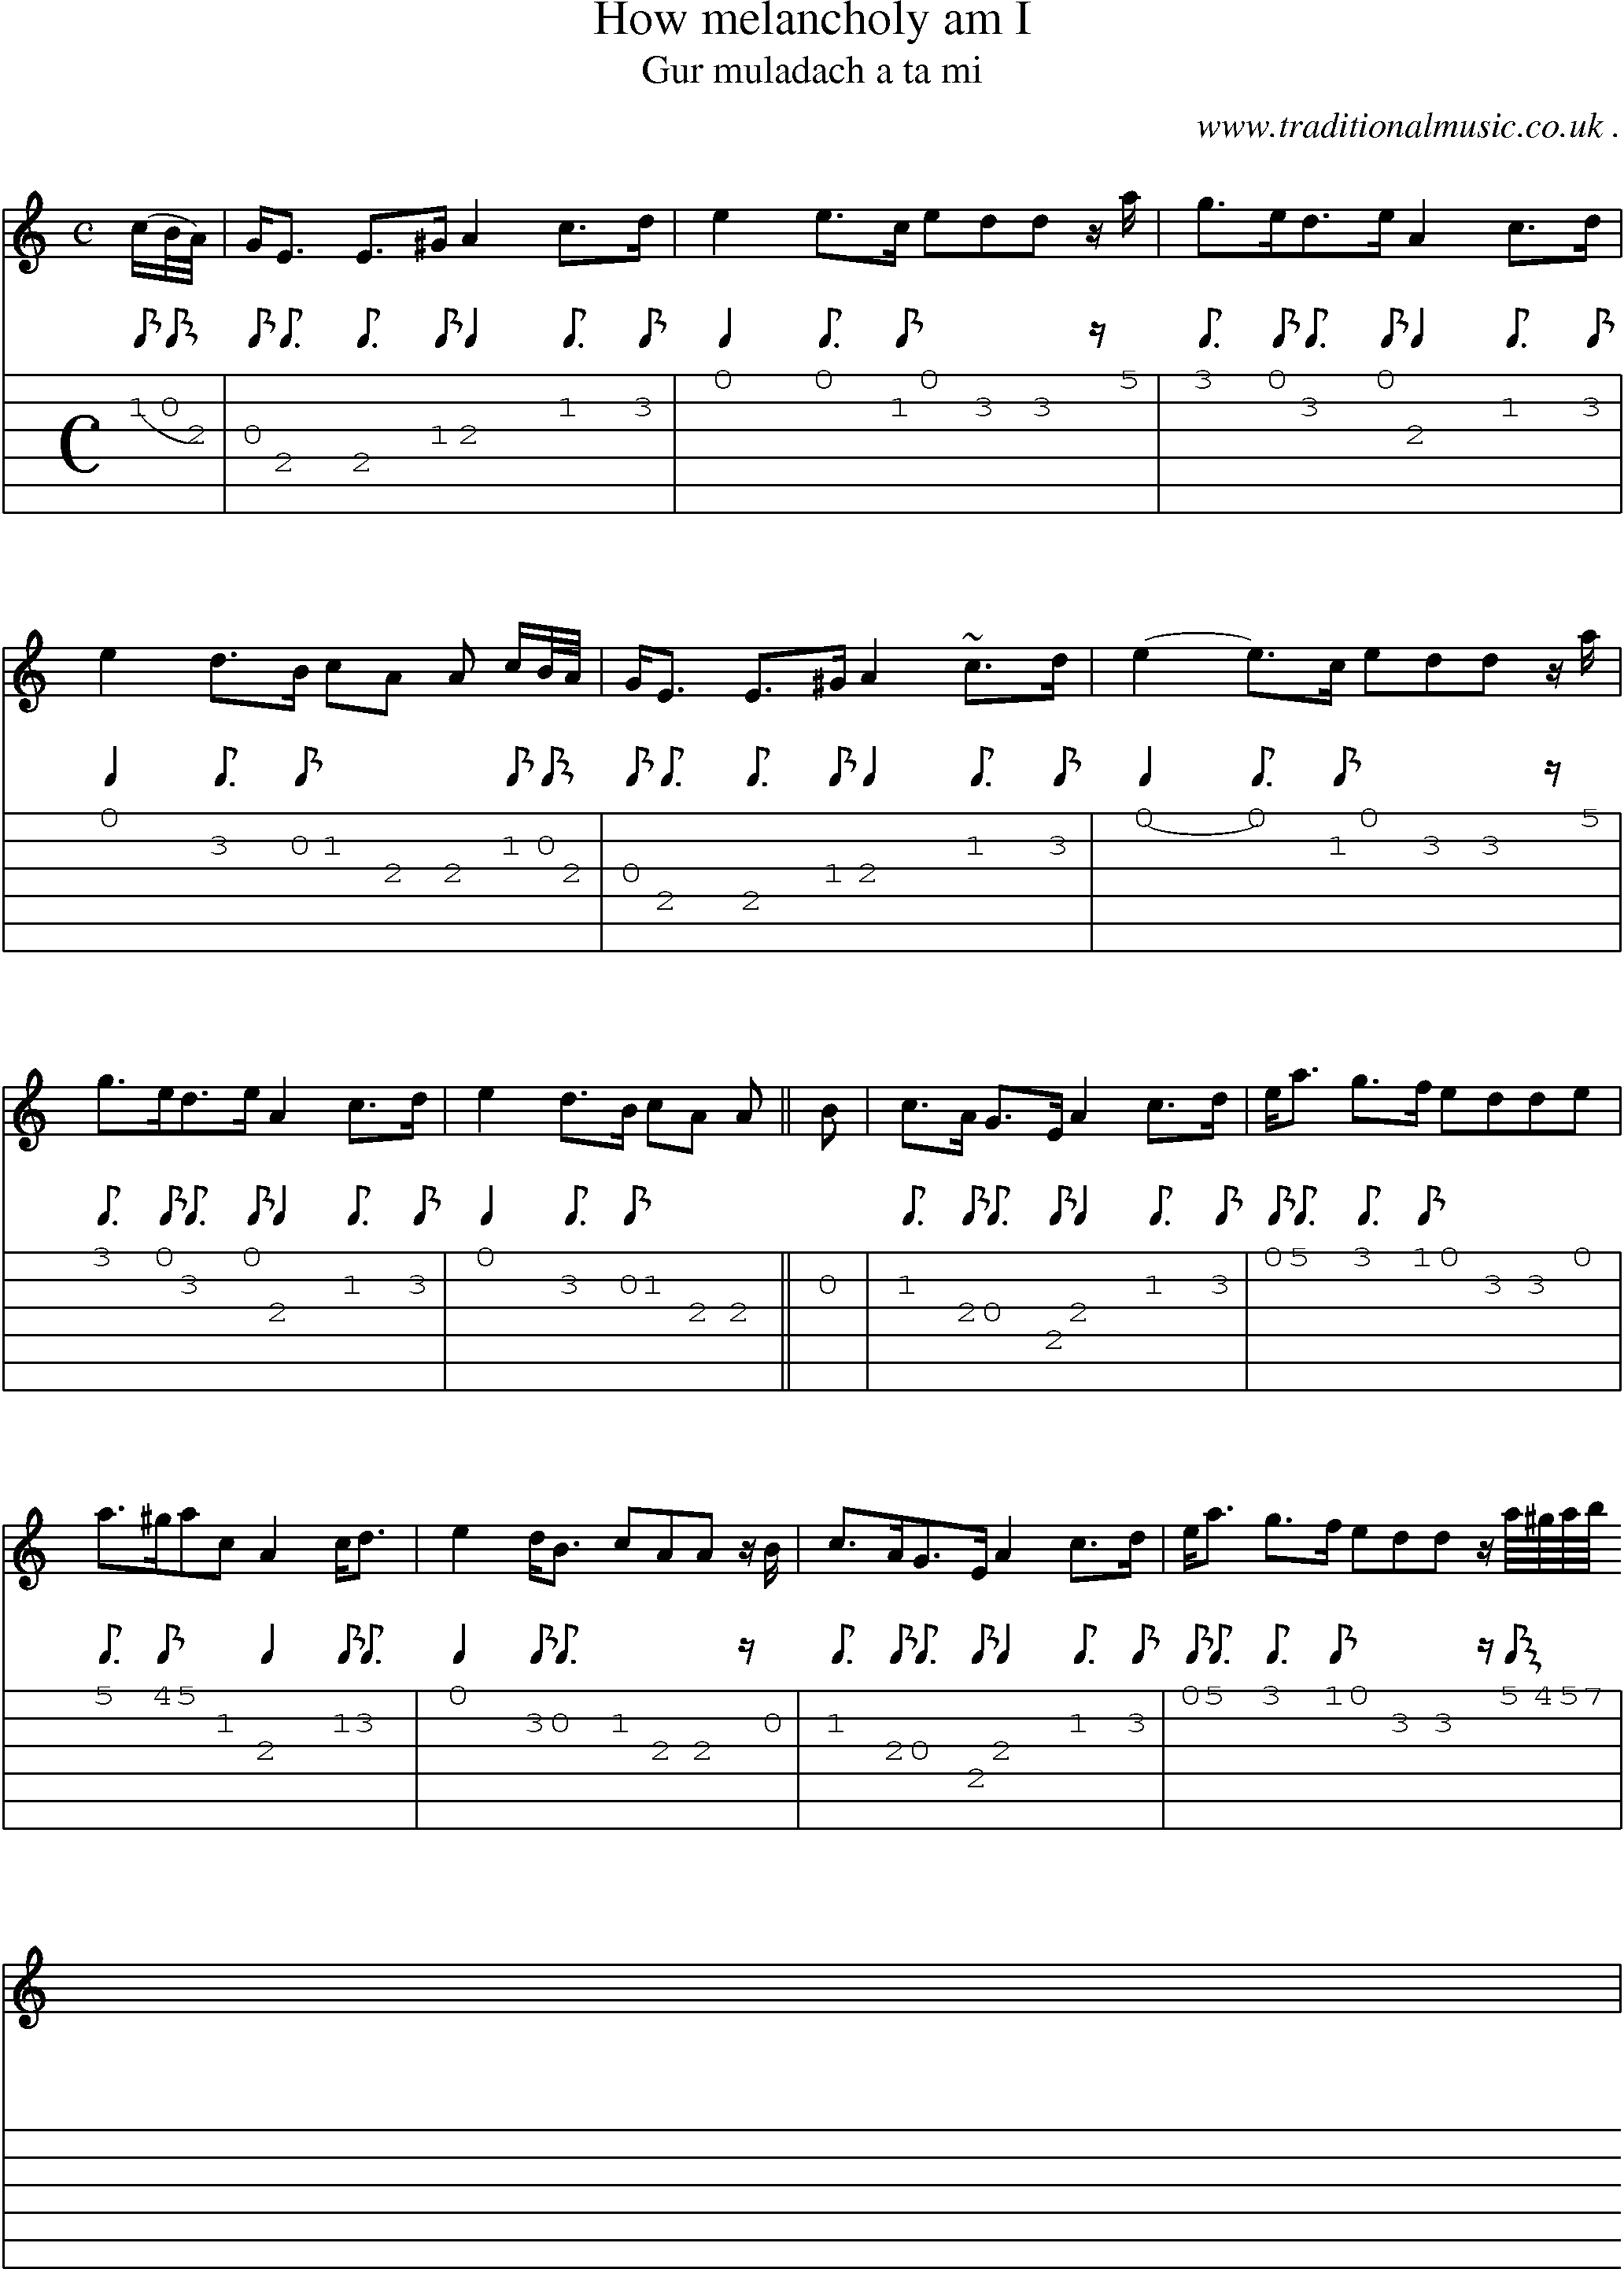 Sheet-music  score, Chords and Guitar Tabs for How Melancholy Am I